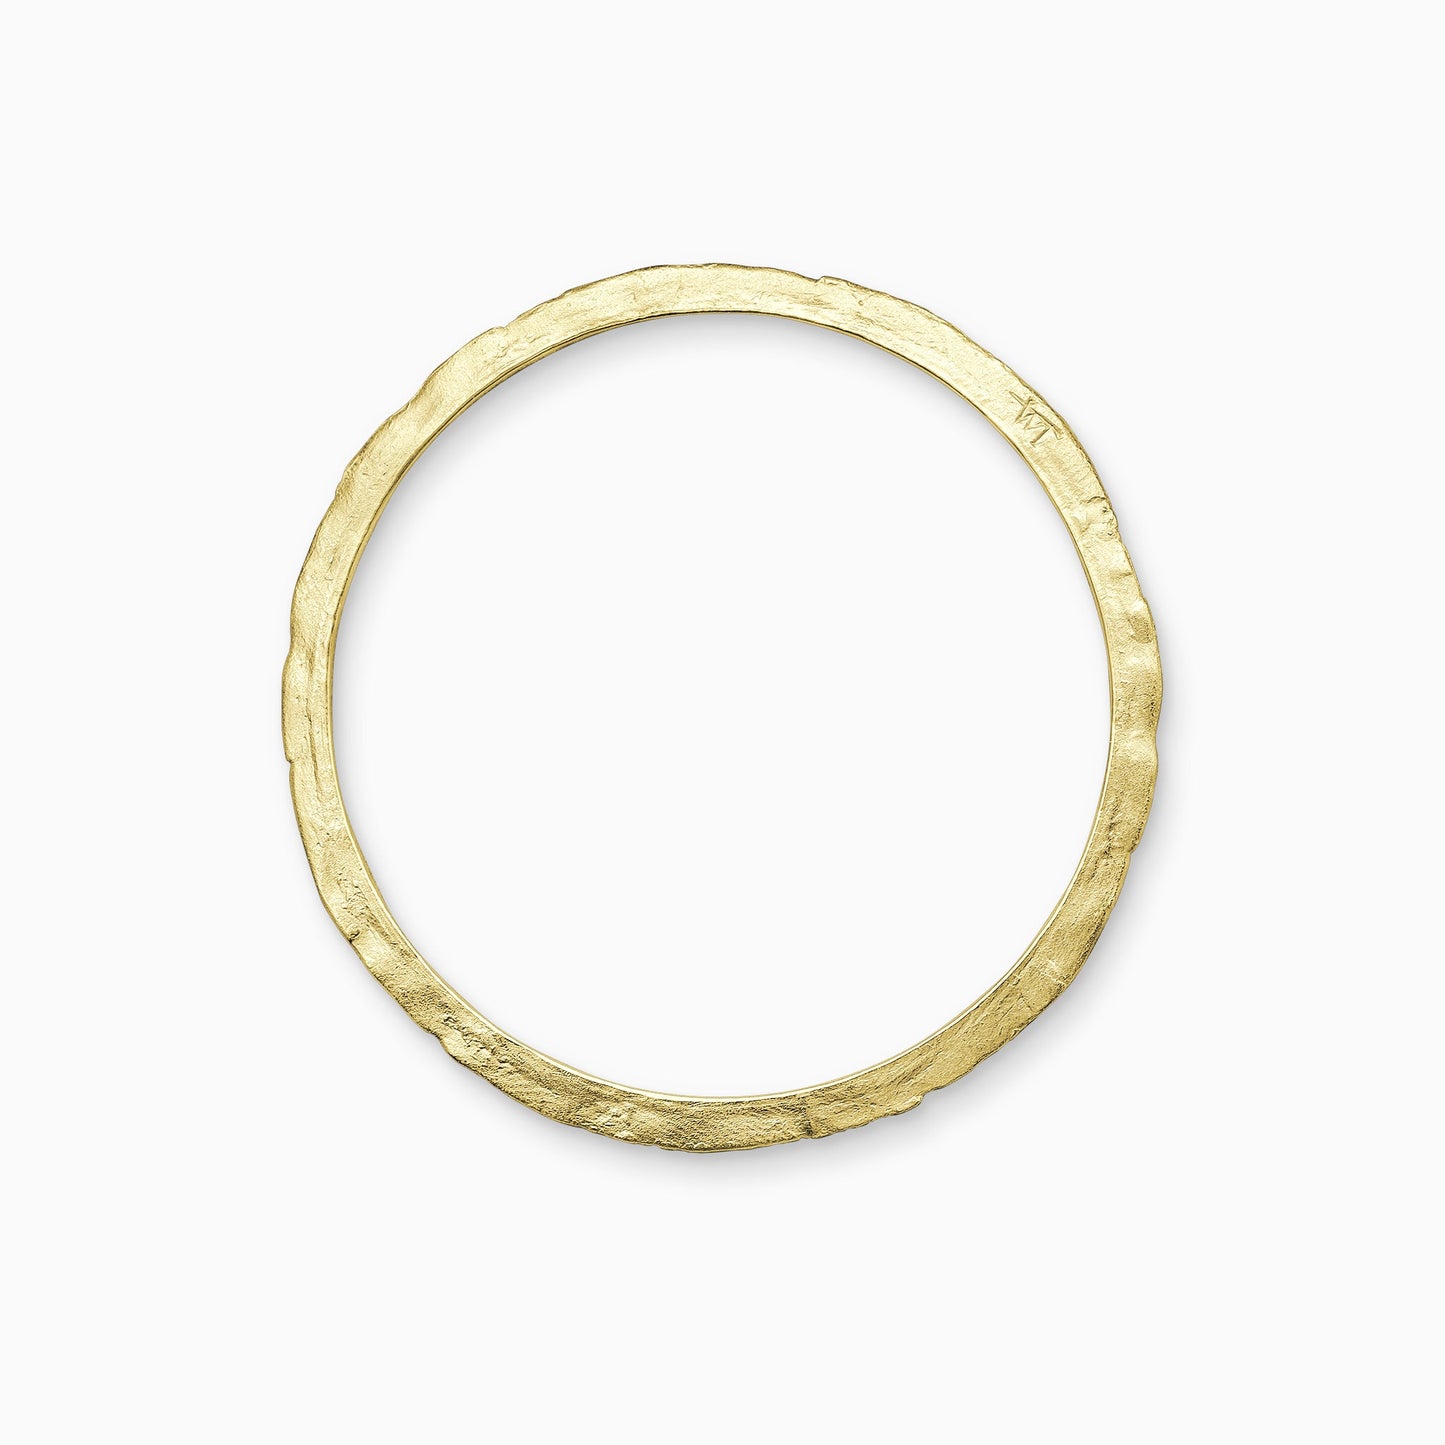 An 18ct Fairtrade yellow gold bangle, textured and flat with smooth inside edge and contoured outer edge. Inside diameter 63mm. Outside diameter 72mm.